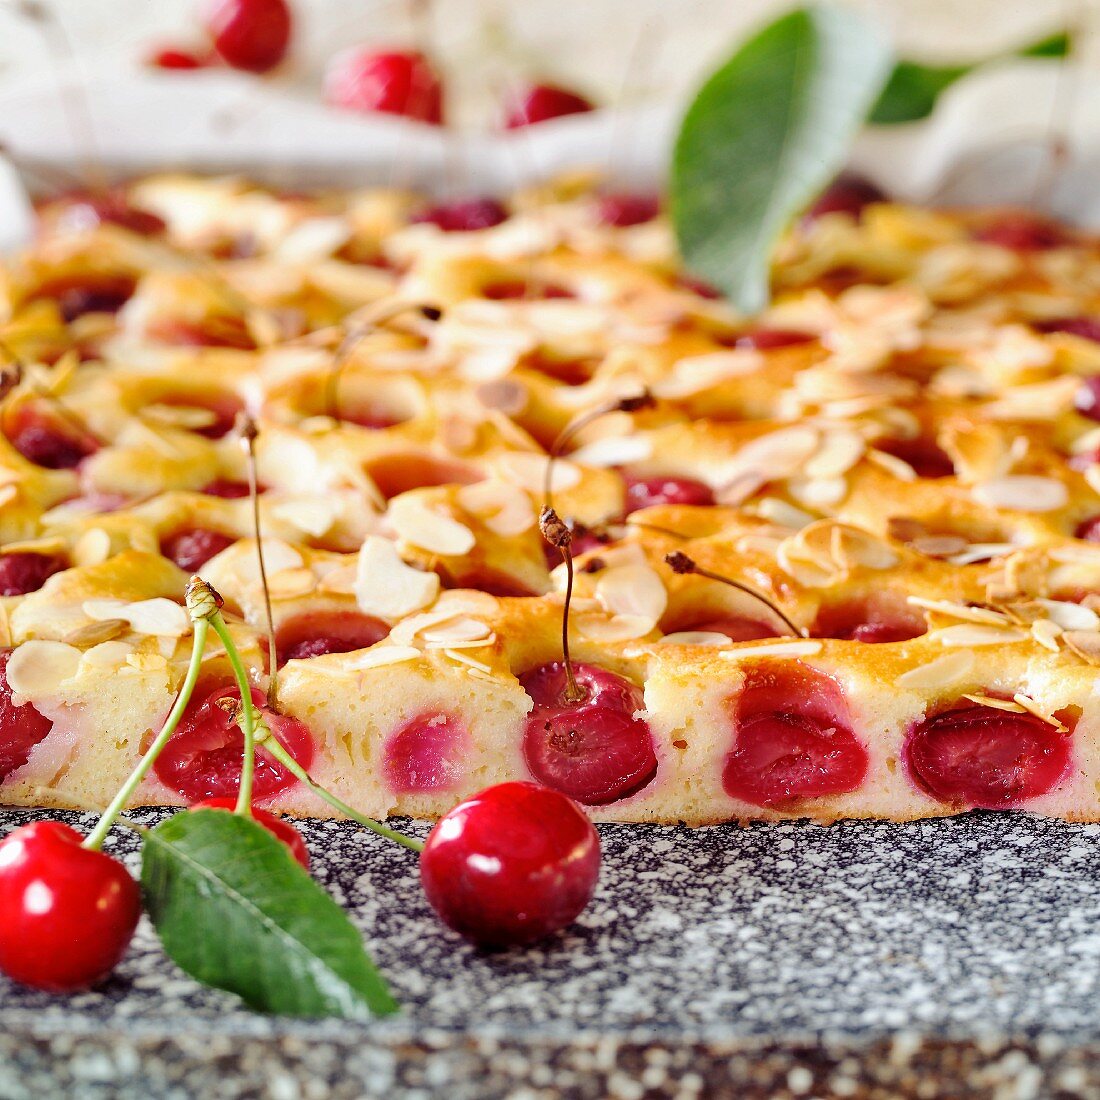 Tray-baked cake with sweet cherries & almonds (a piece cut)